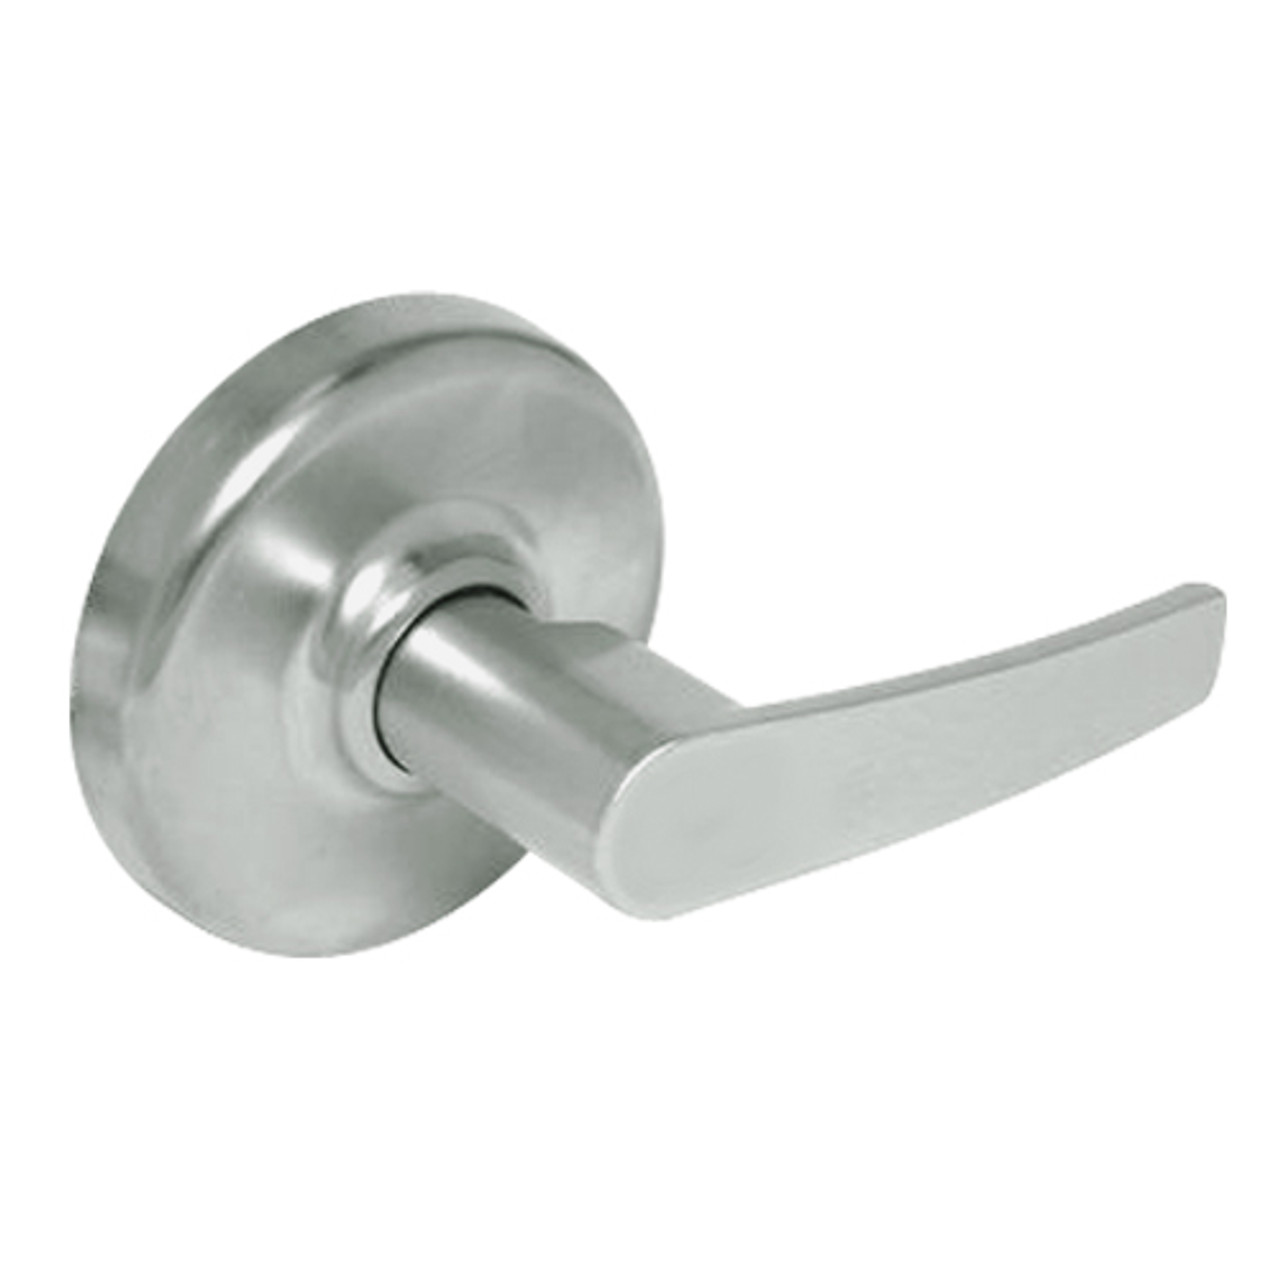 CL3350-AZD-619 Corbin CL3300 Series Extra Heavy Duty Half Dummy Cylindrical Locksets with Armstrong Lever in Satin Nickel Plated Finish